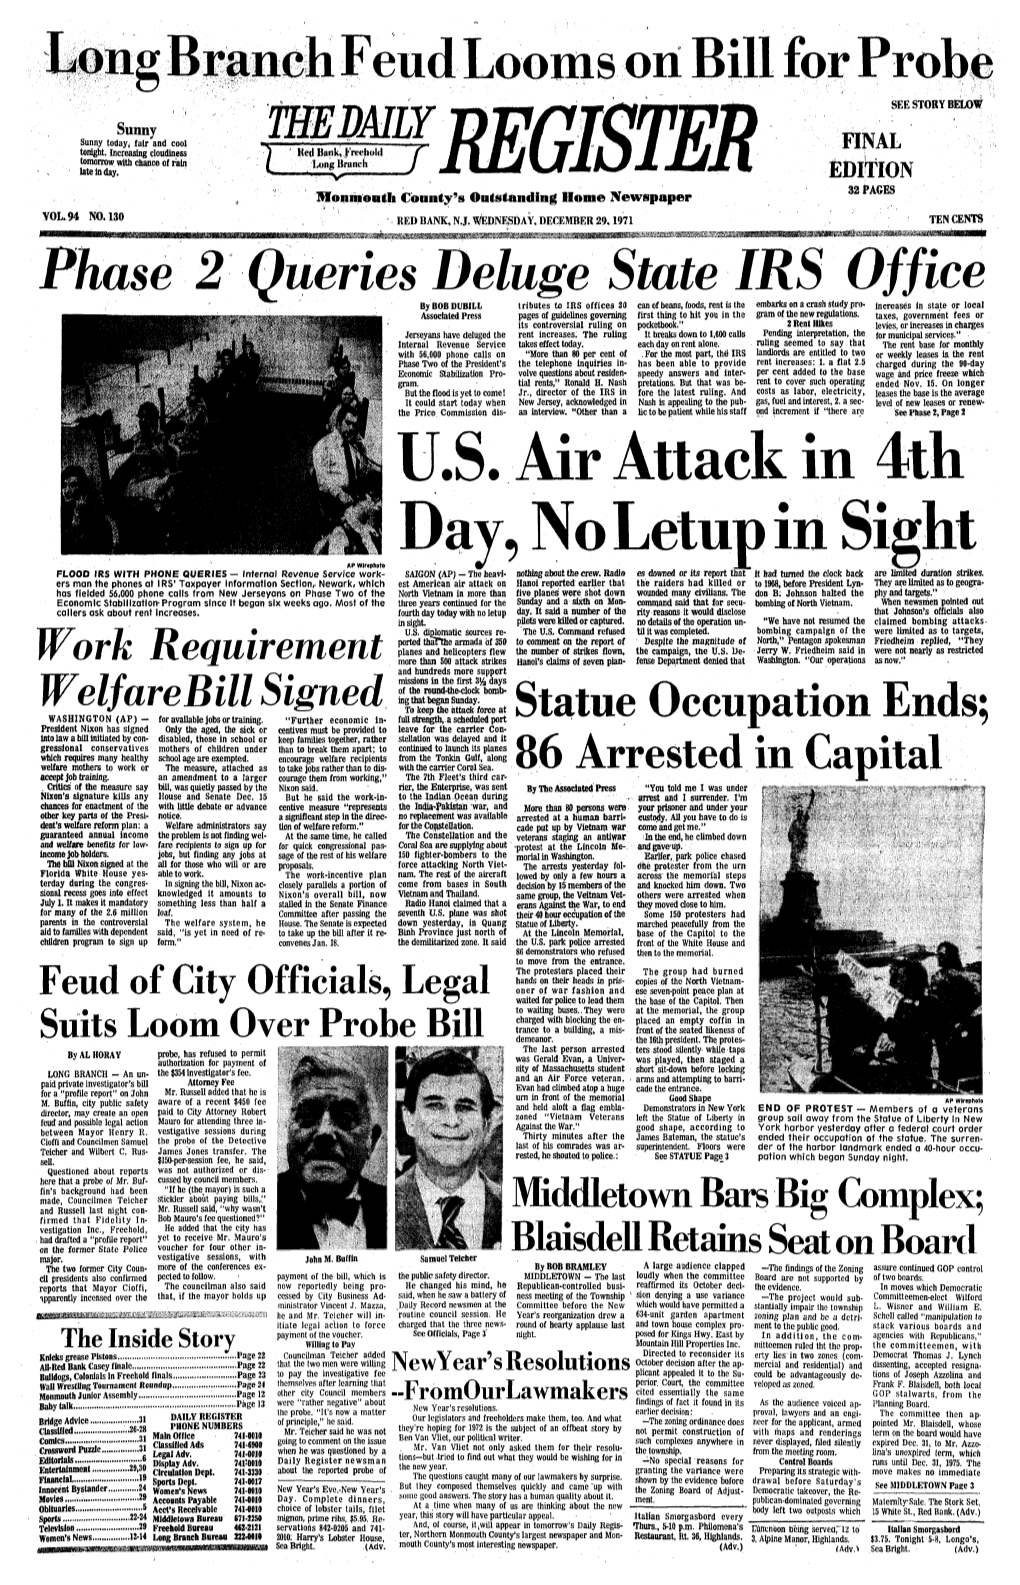 U.S. Air Attack in 4Th Day, No Letup in Apwirephoto FLOOD IRS with PHONE QUERIES — Internal Revenue Service Work- SAIGON (AP) - the Heavi- Nothing About the Crew